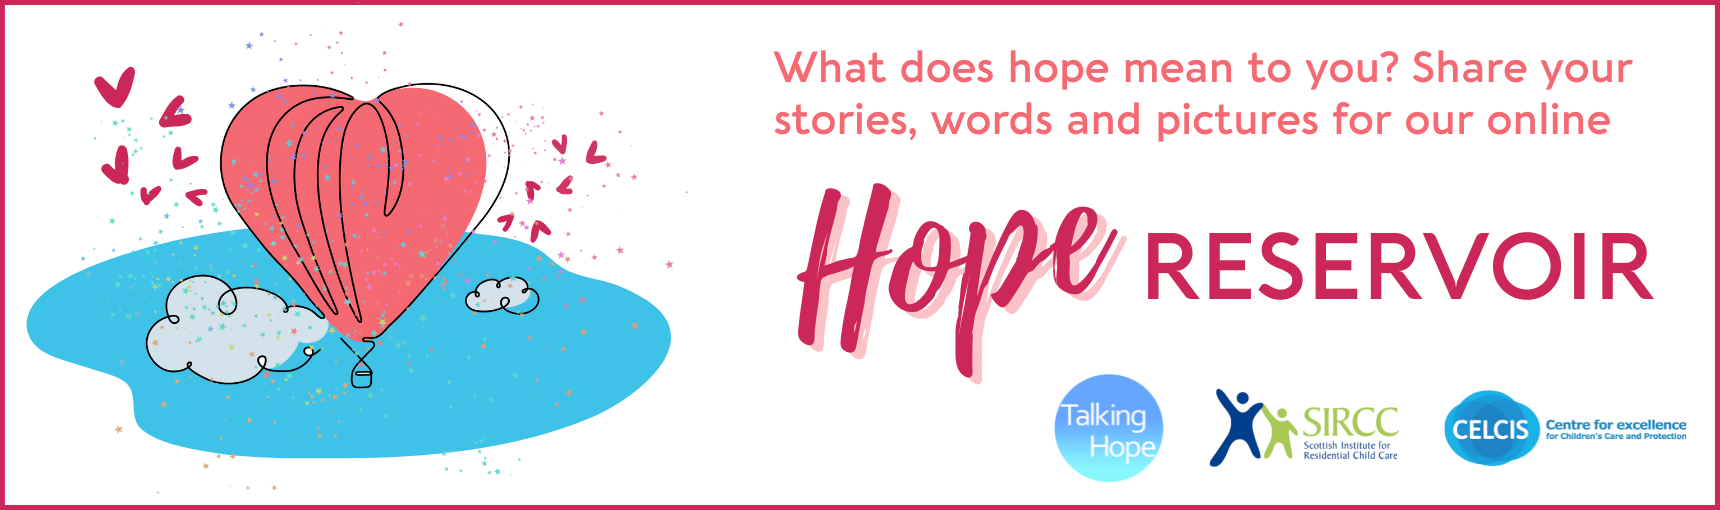 How hope can help